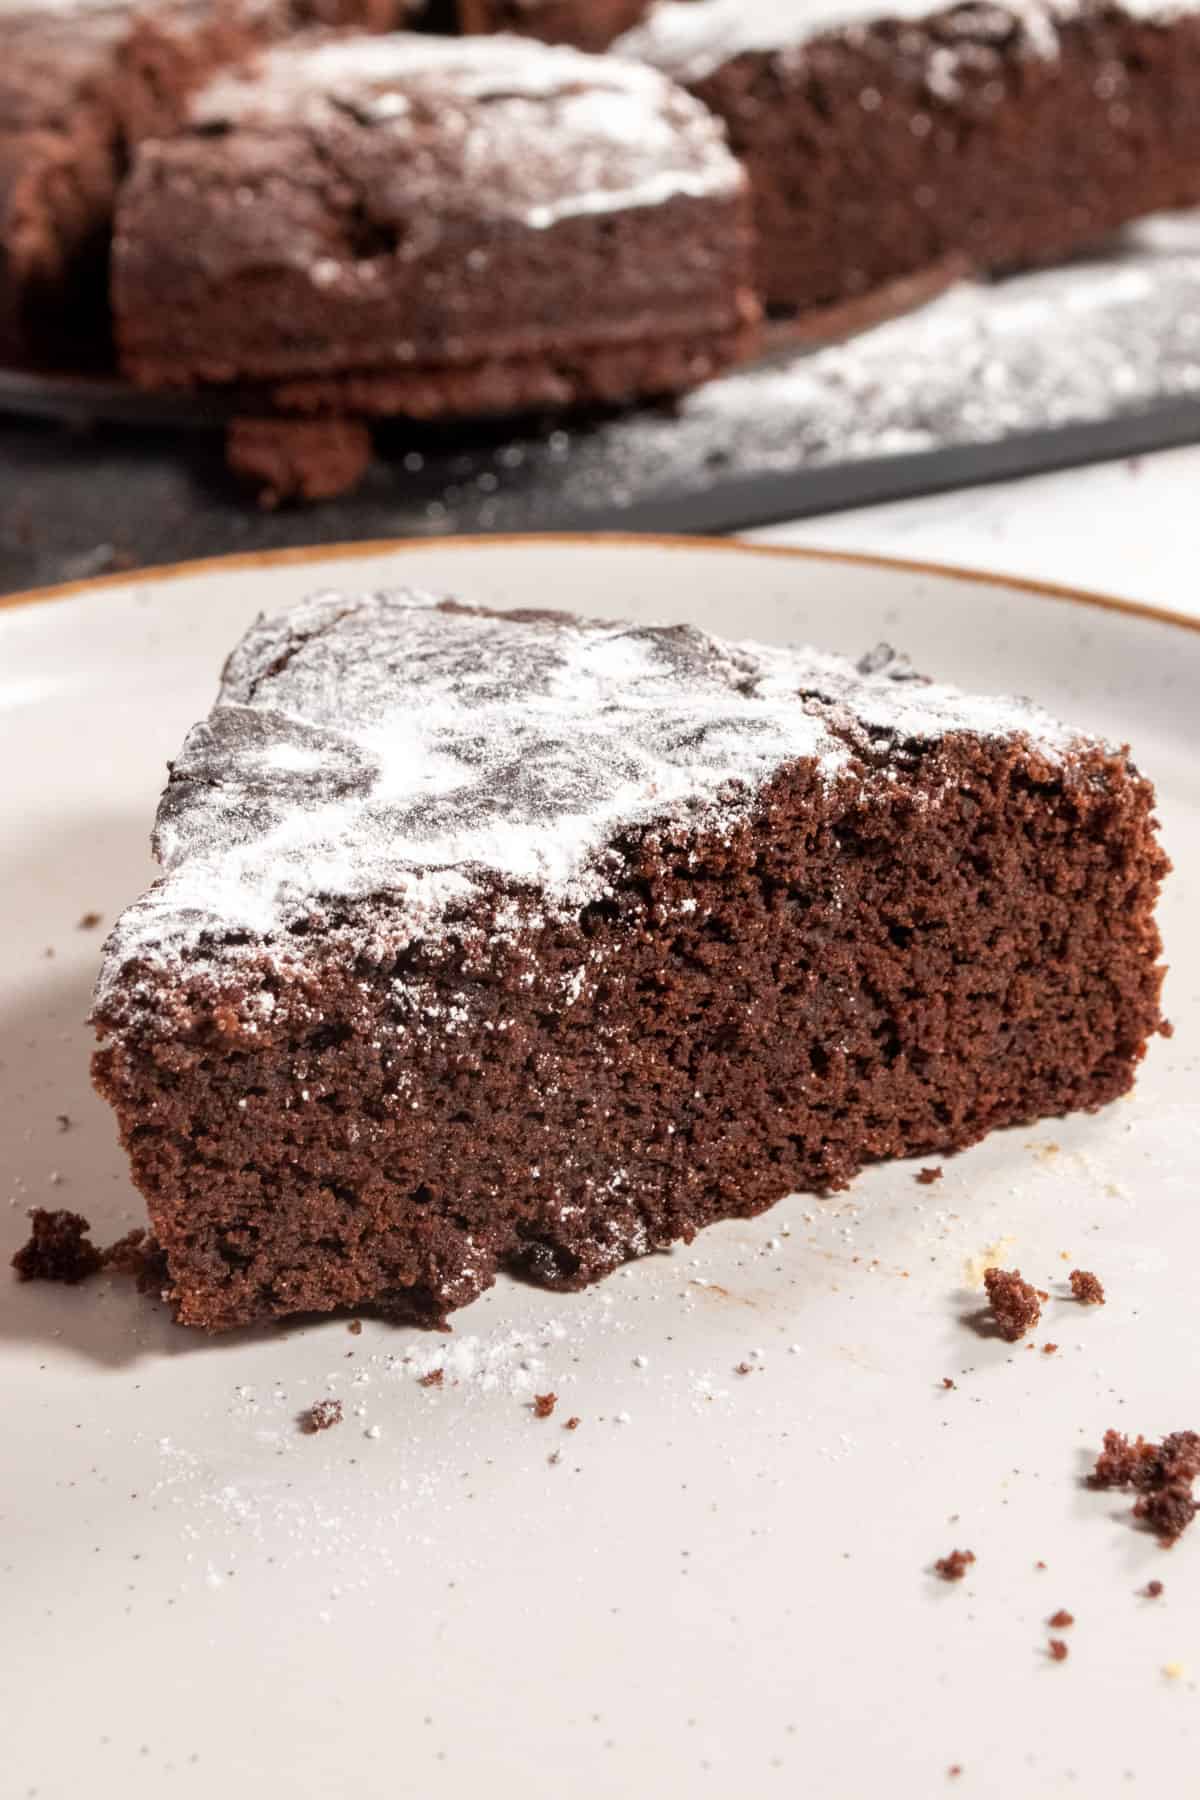 A large piece of chocolate cake in the centre of a brown-rimmed plate. It is dusted with powdered sugar and the rest of the cake sits on a slate platter in the background.